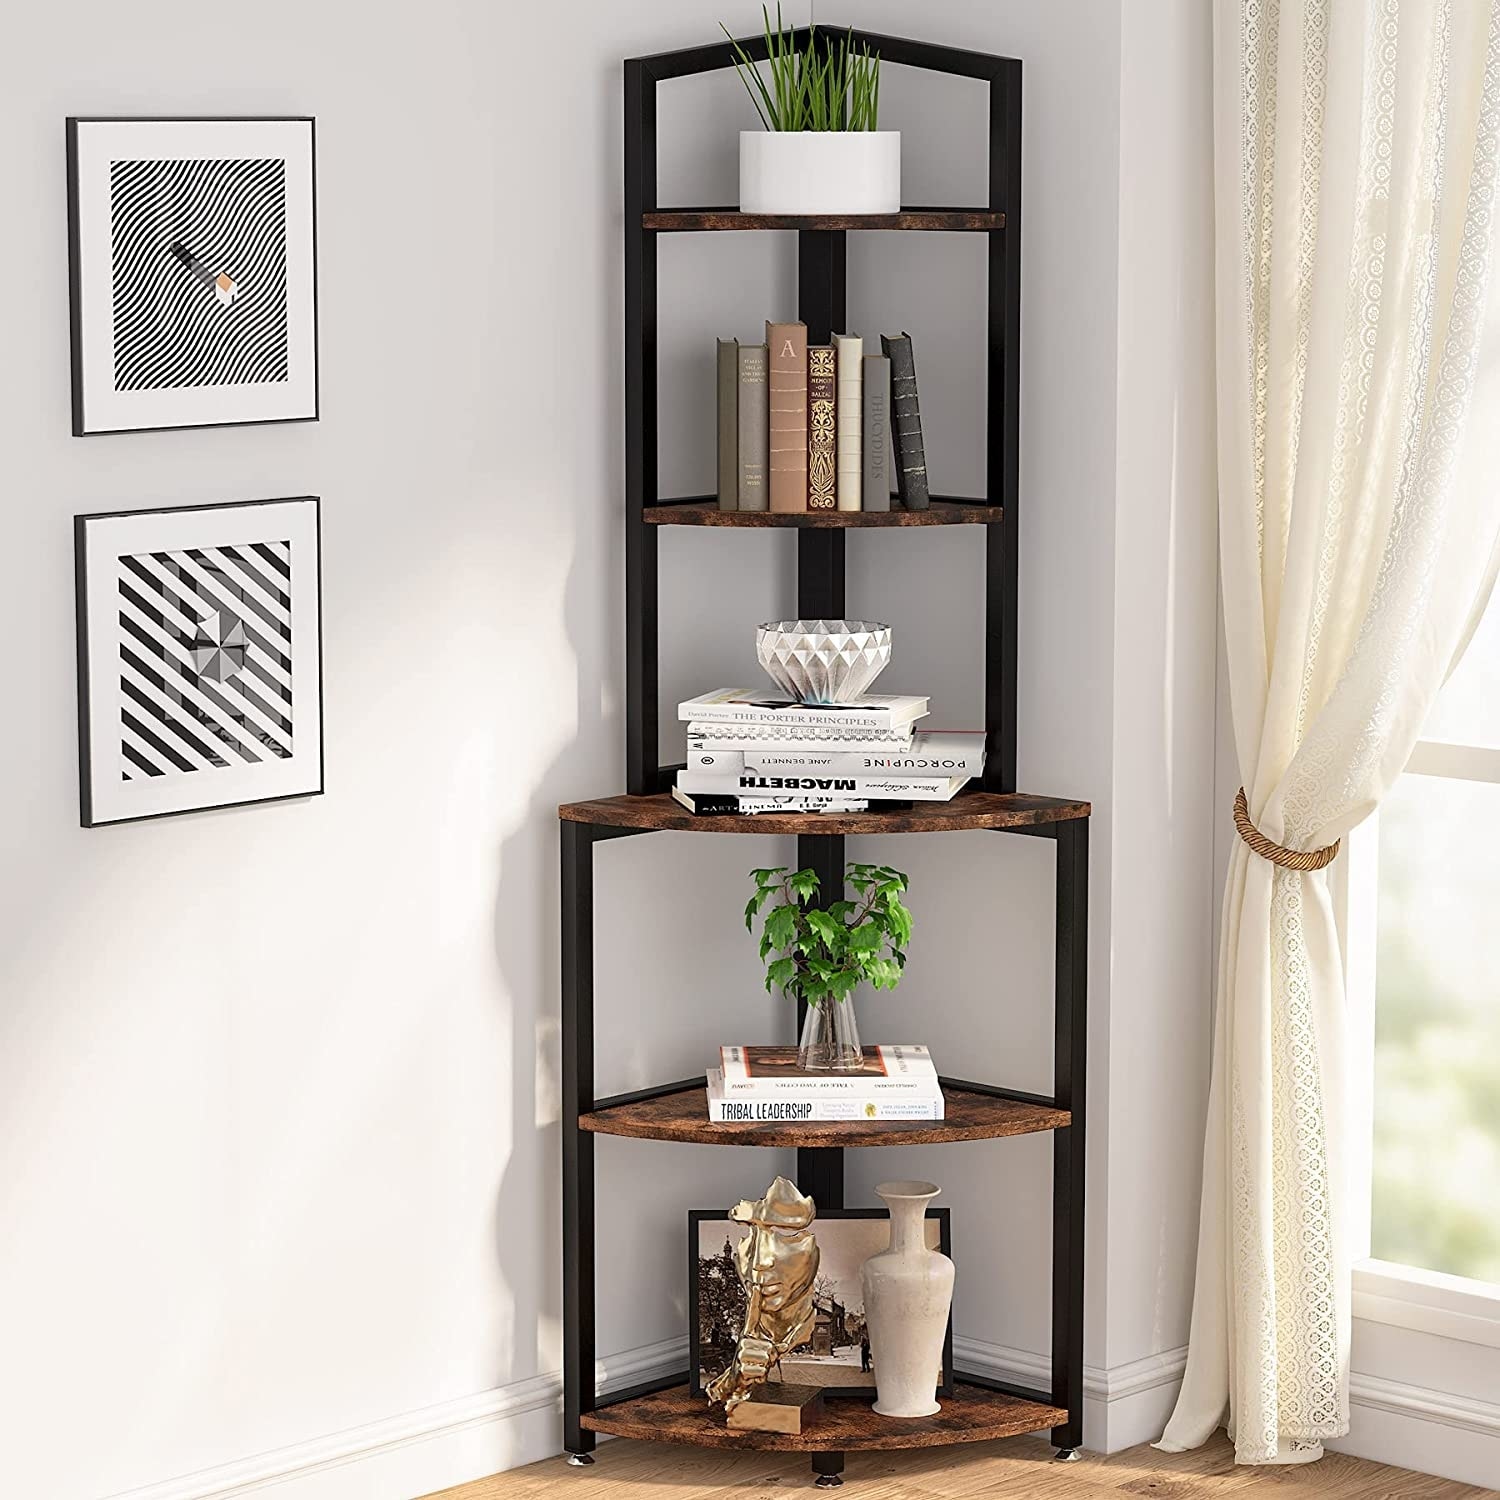 https://ak1.ostkcdn.com/images/products/is/images/direct/d2546dc34a1912f0f53f07e1a0f14627ef24ac05/60-Inch-Tall-Corner-Shelf%2C-5-Tier-Small-Bookcase%2C-Industrial-Plant-Stand-for-Living-Room%2C-Bedroom%2C-Home-Office.jpg